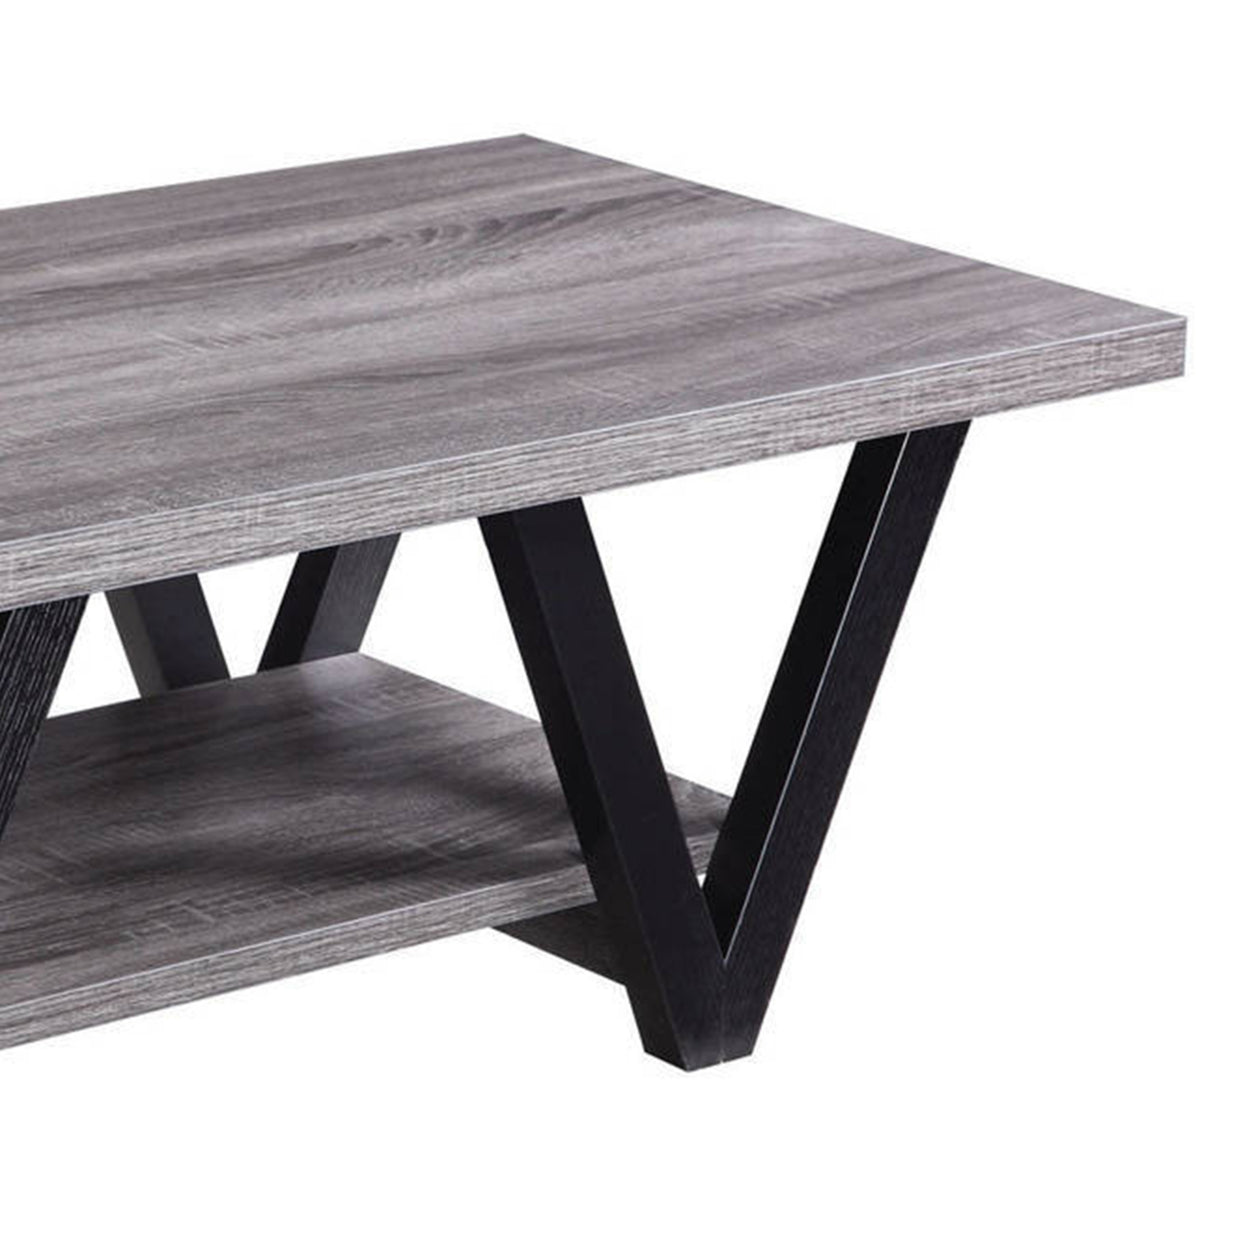 Higgins V-shaped Coffee Table Black and Antique Grey